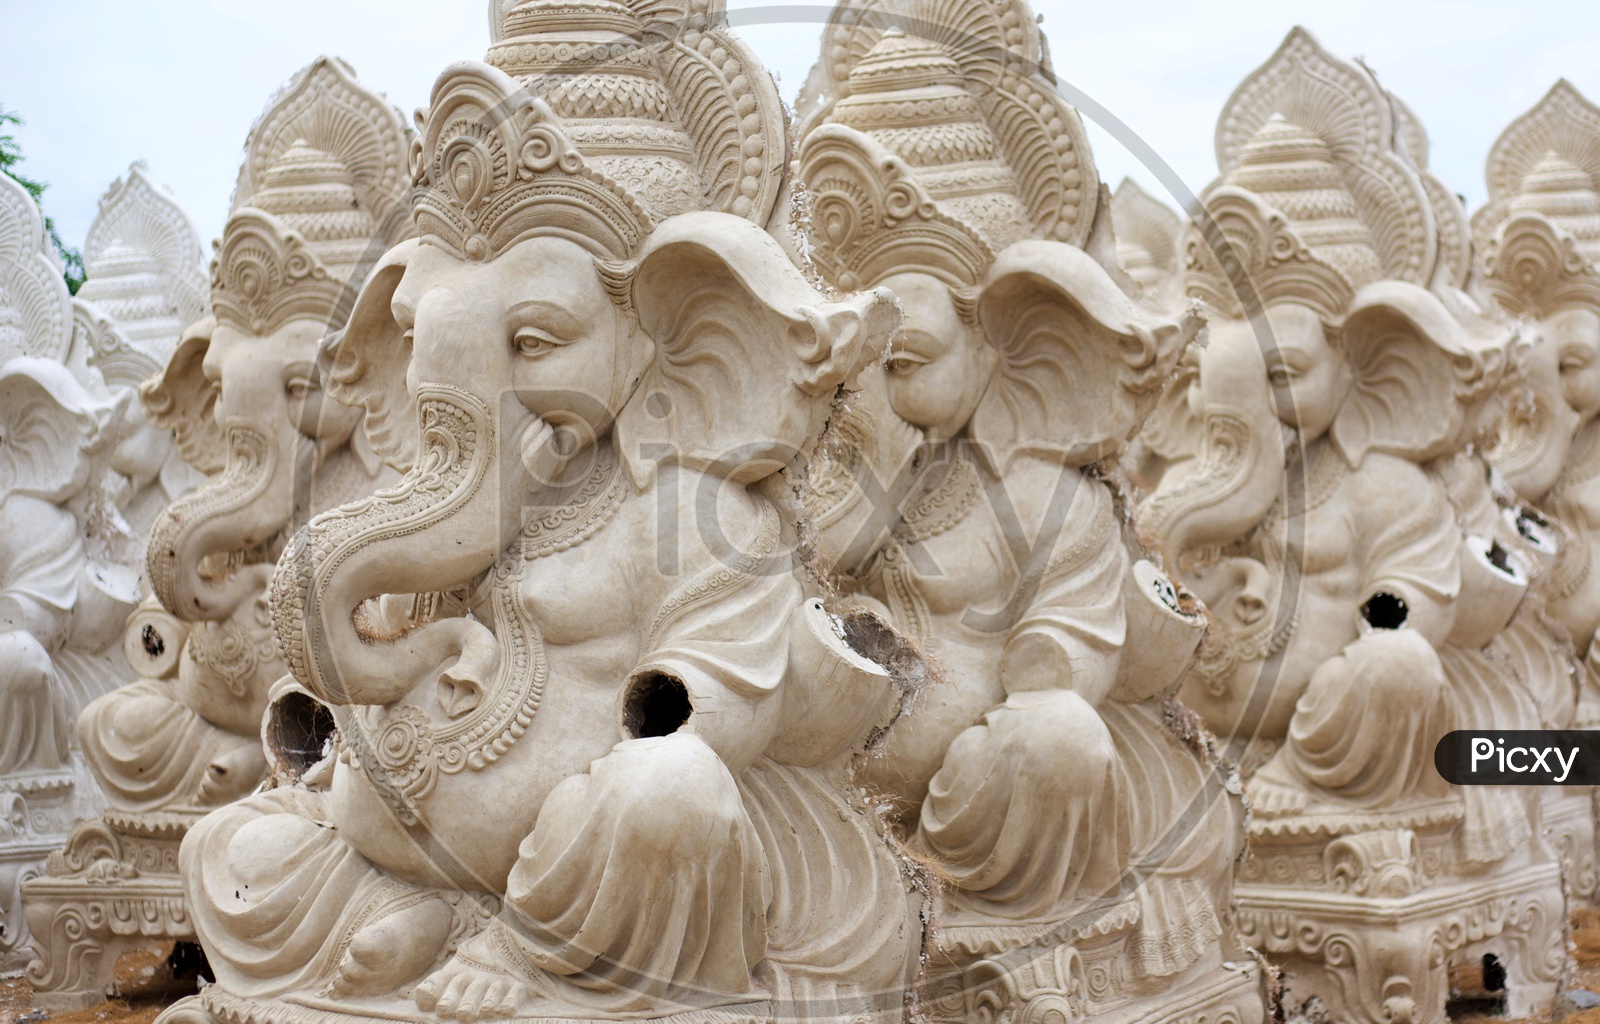 Ganesh statues made of plaster of paris.